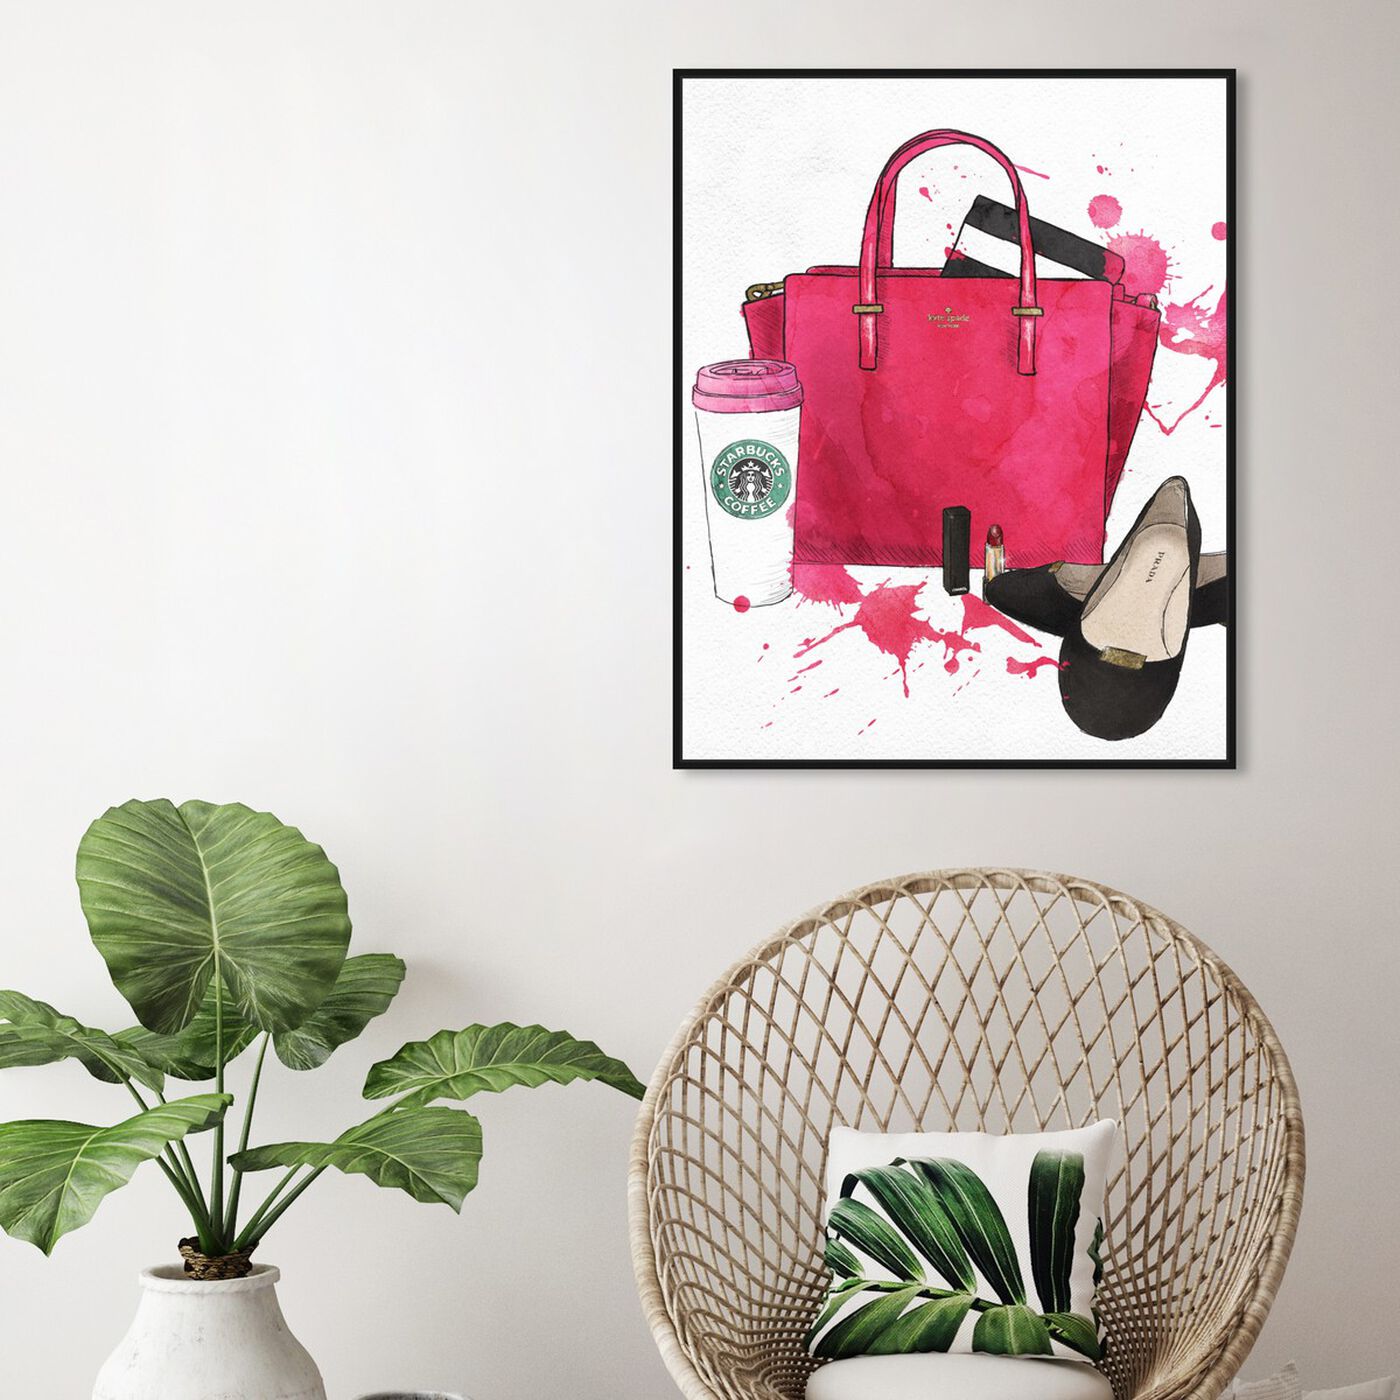 Hanging view of Bags, Shoes, and Coffee featuring fashion and glam and handbags art.